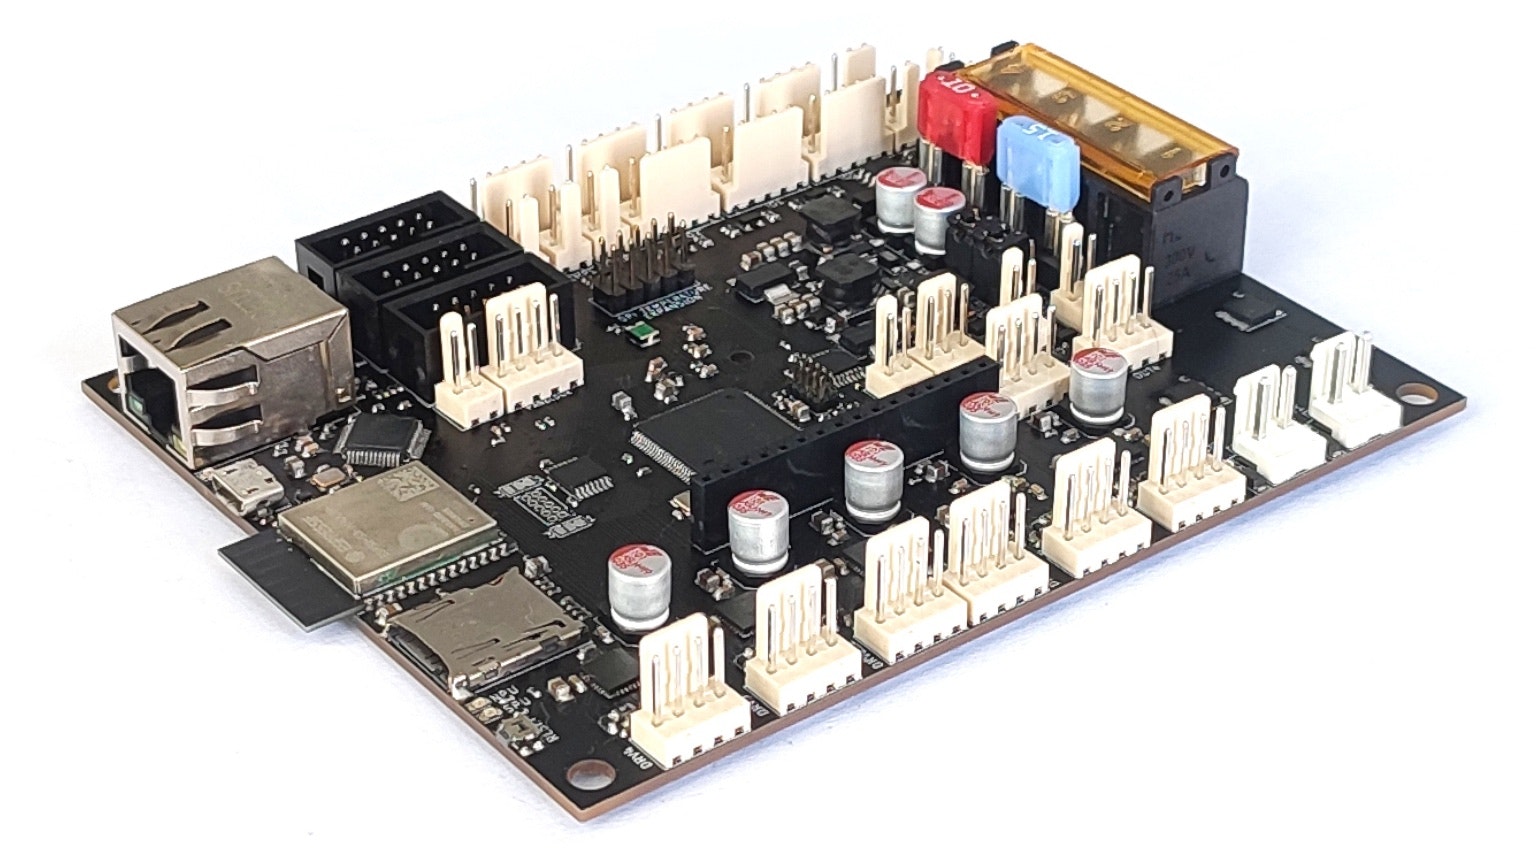 Slibende Forekomme Kalkun Phi Mainboard 5LC Is an Open Source 3D Printer Controller with Built-In  Wi-Fi and Ethernet - Hackster.io